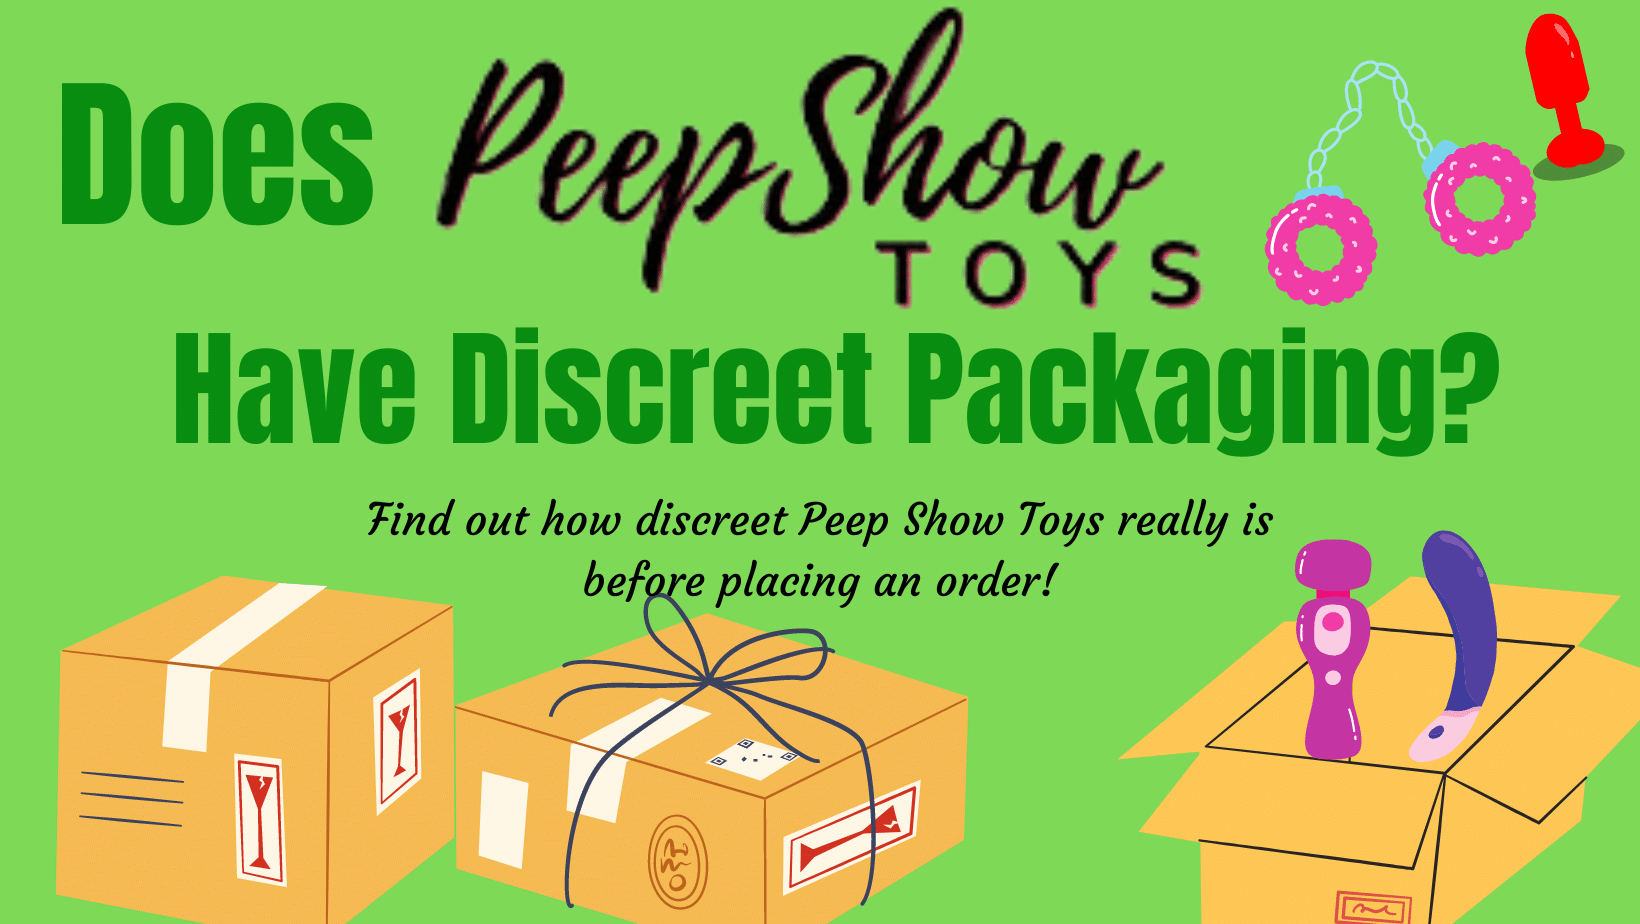 Does Peepshow Toys Have Discreet Packaging? I Bedbible.com